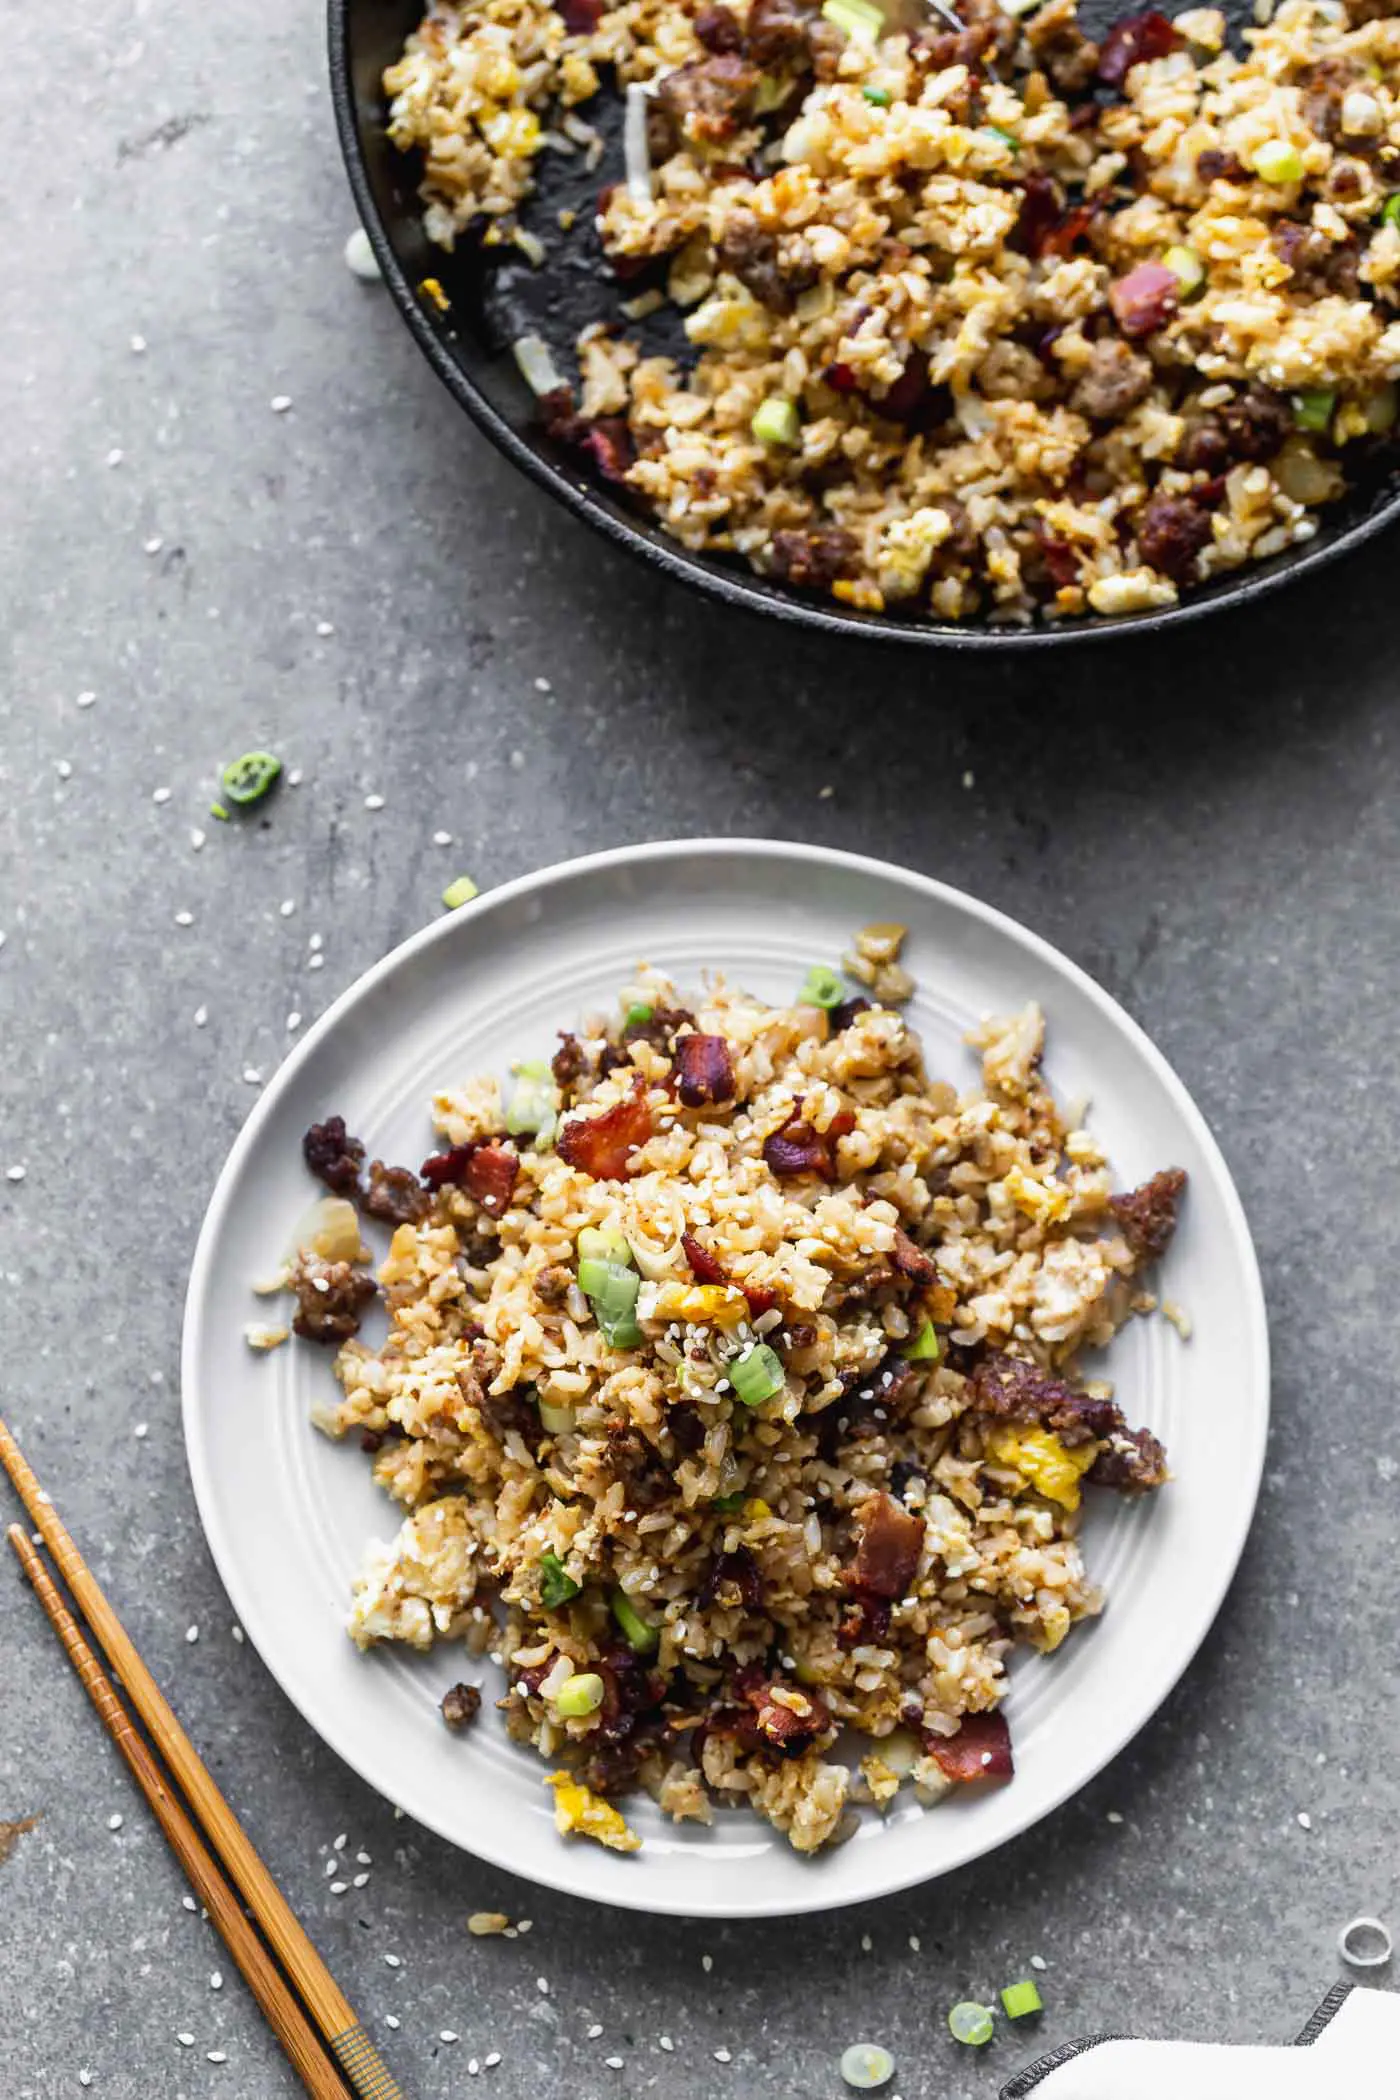 This Breakfast Fried Rice Recipe is packed with salty bacon and sausage, a light soy sauce, oniob, garlic, and plenty of hearty scrambled eggs.